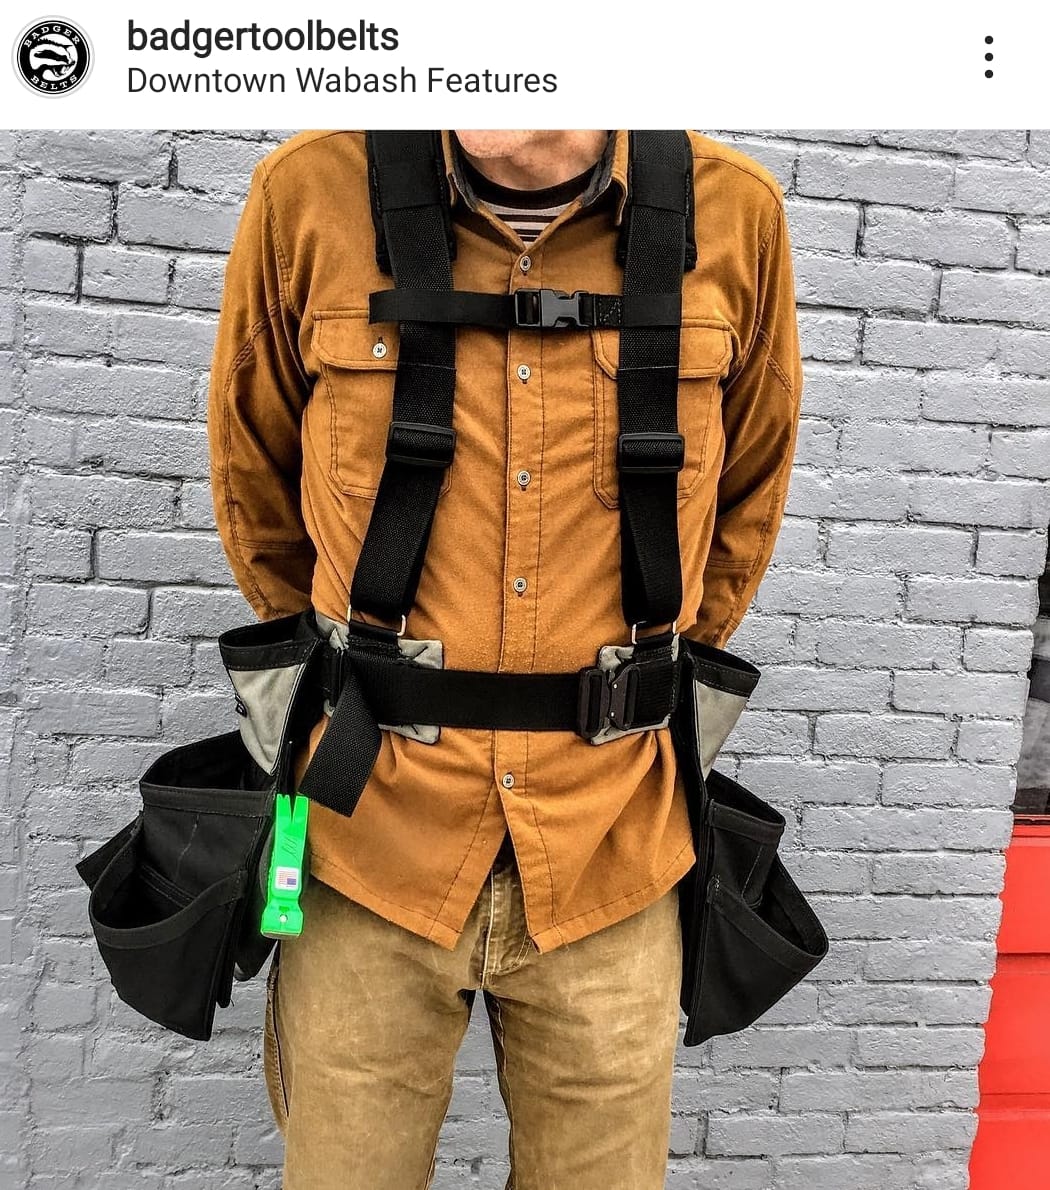 What's the most comfortable toolbelt to wear? - TF Tools Ltd